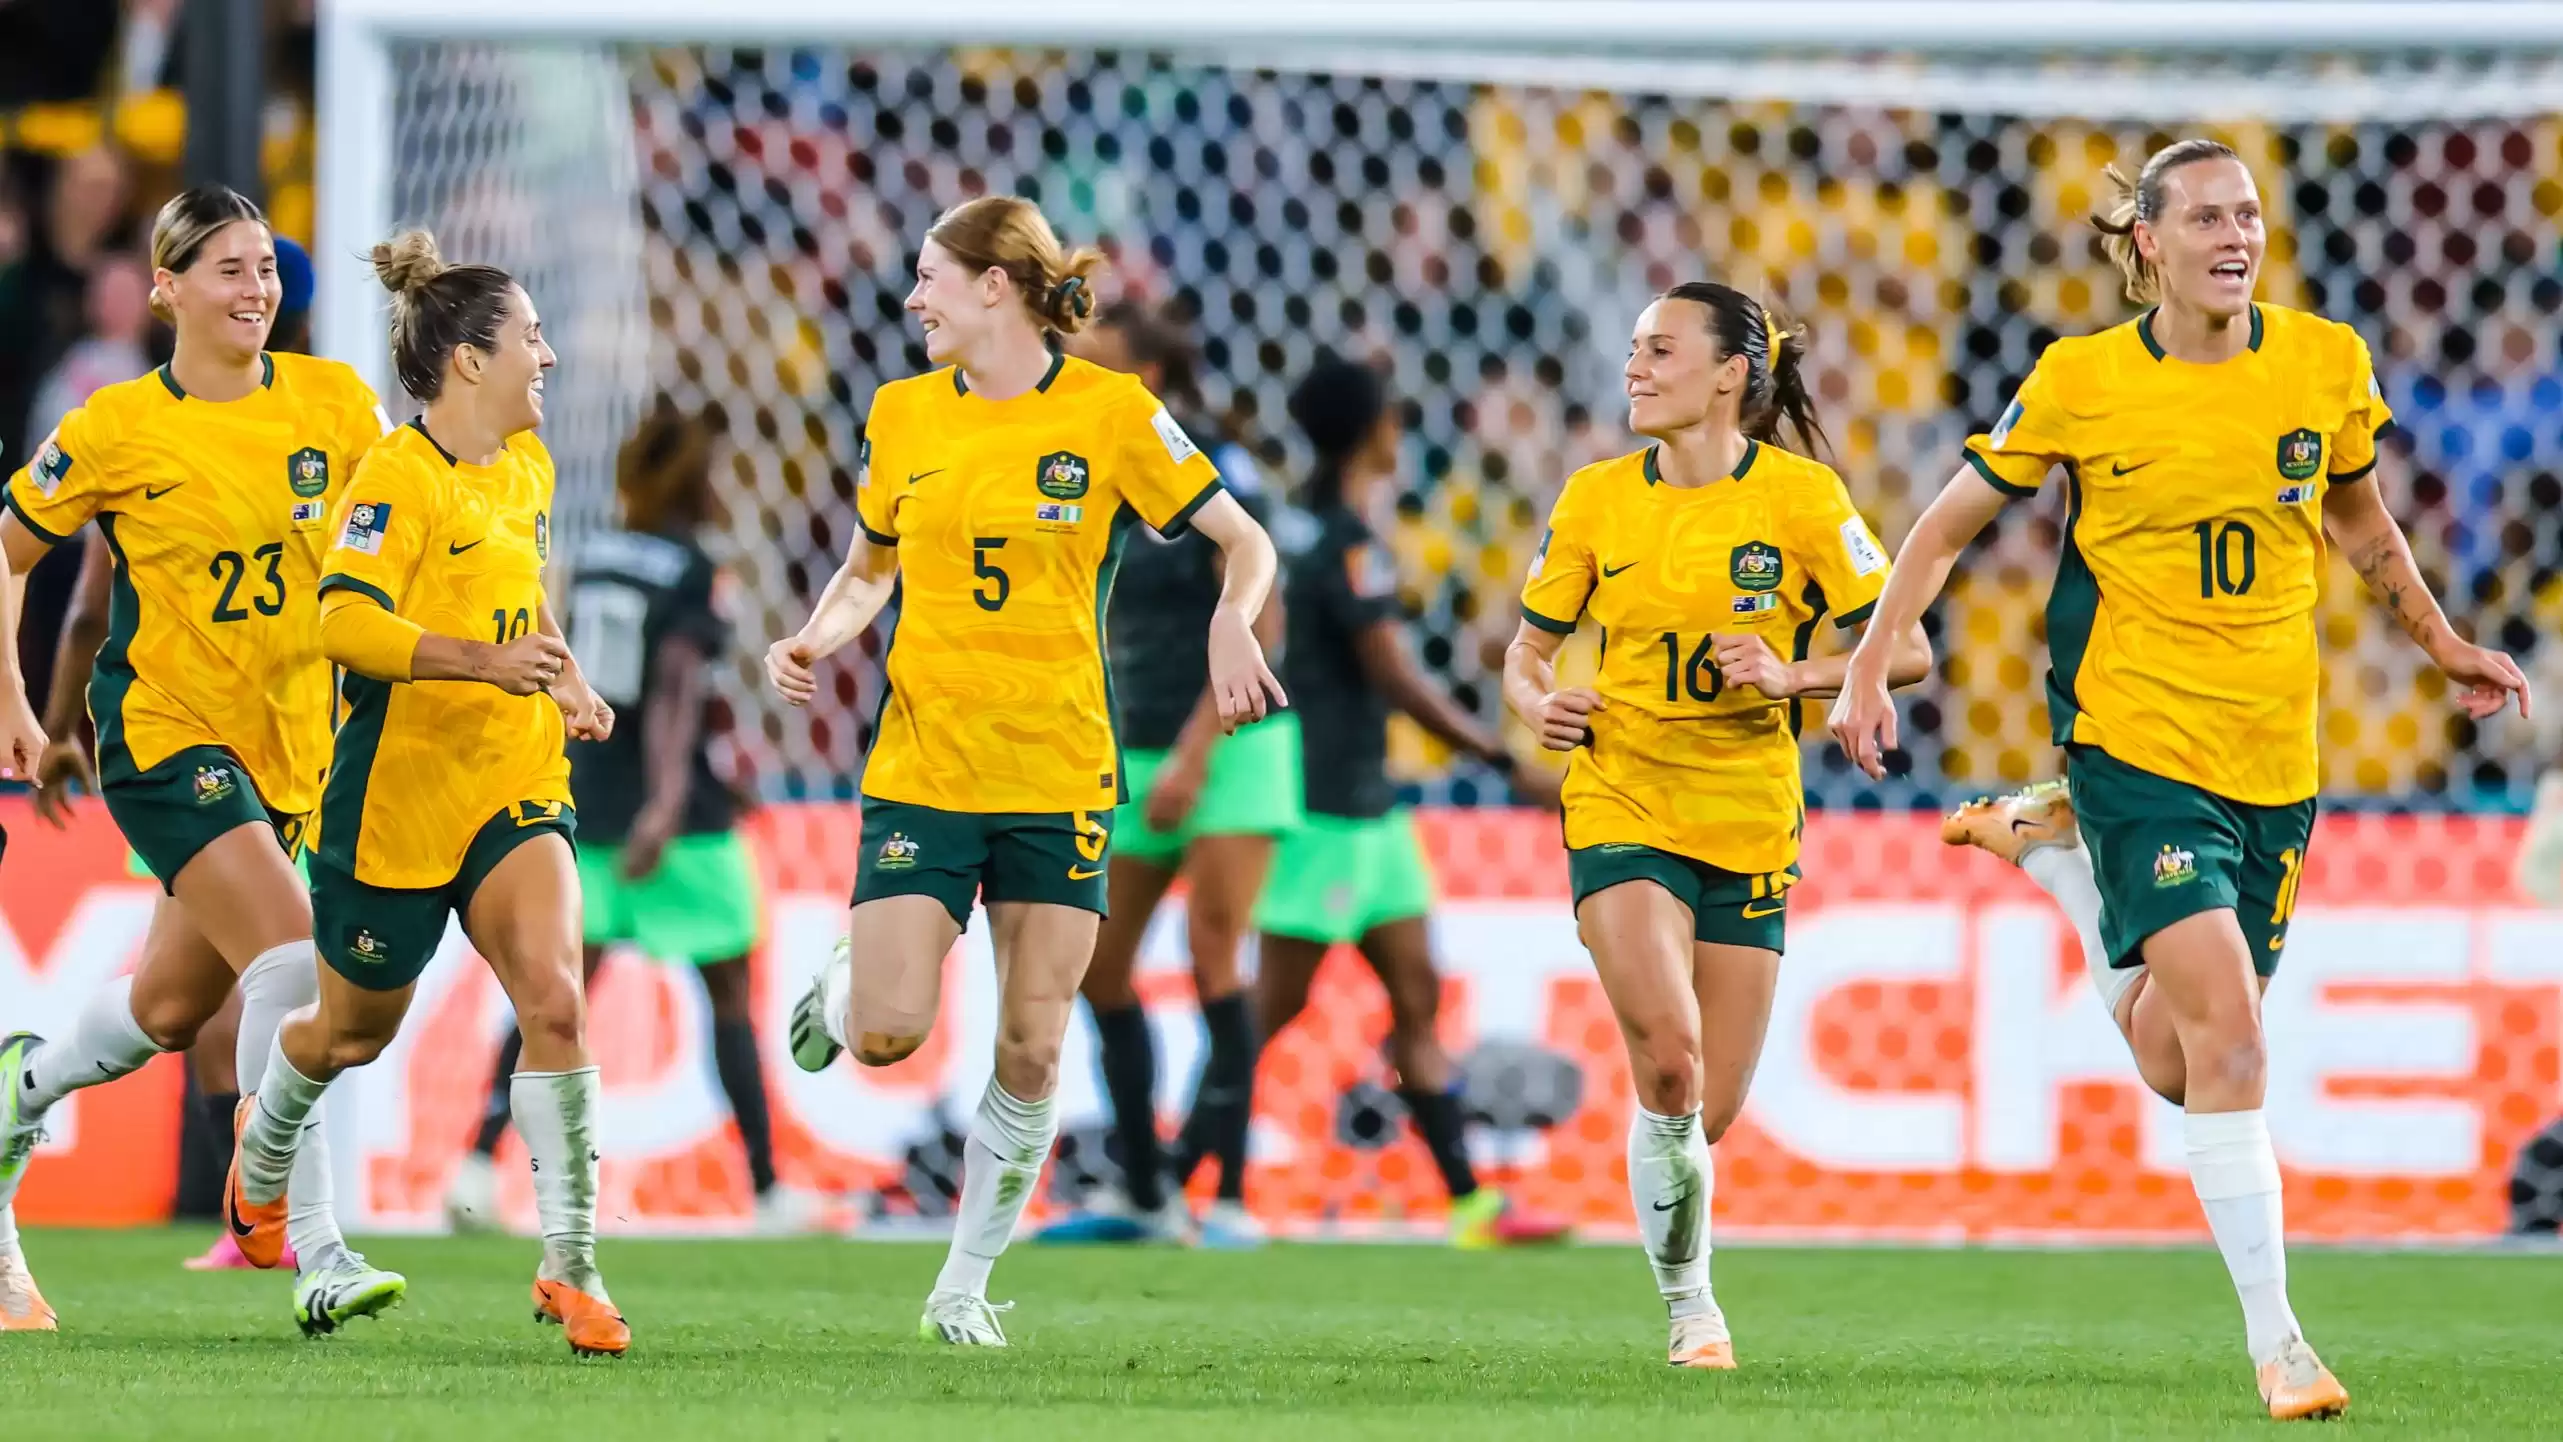 Matildas Game Finish Time Tonight: Kickoff and Full Time for Australia vs France